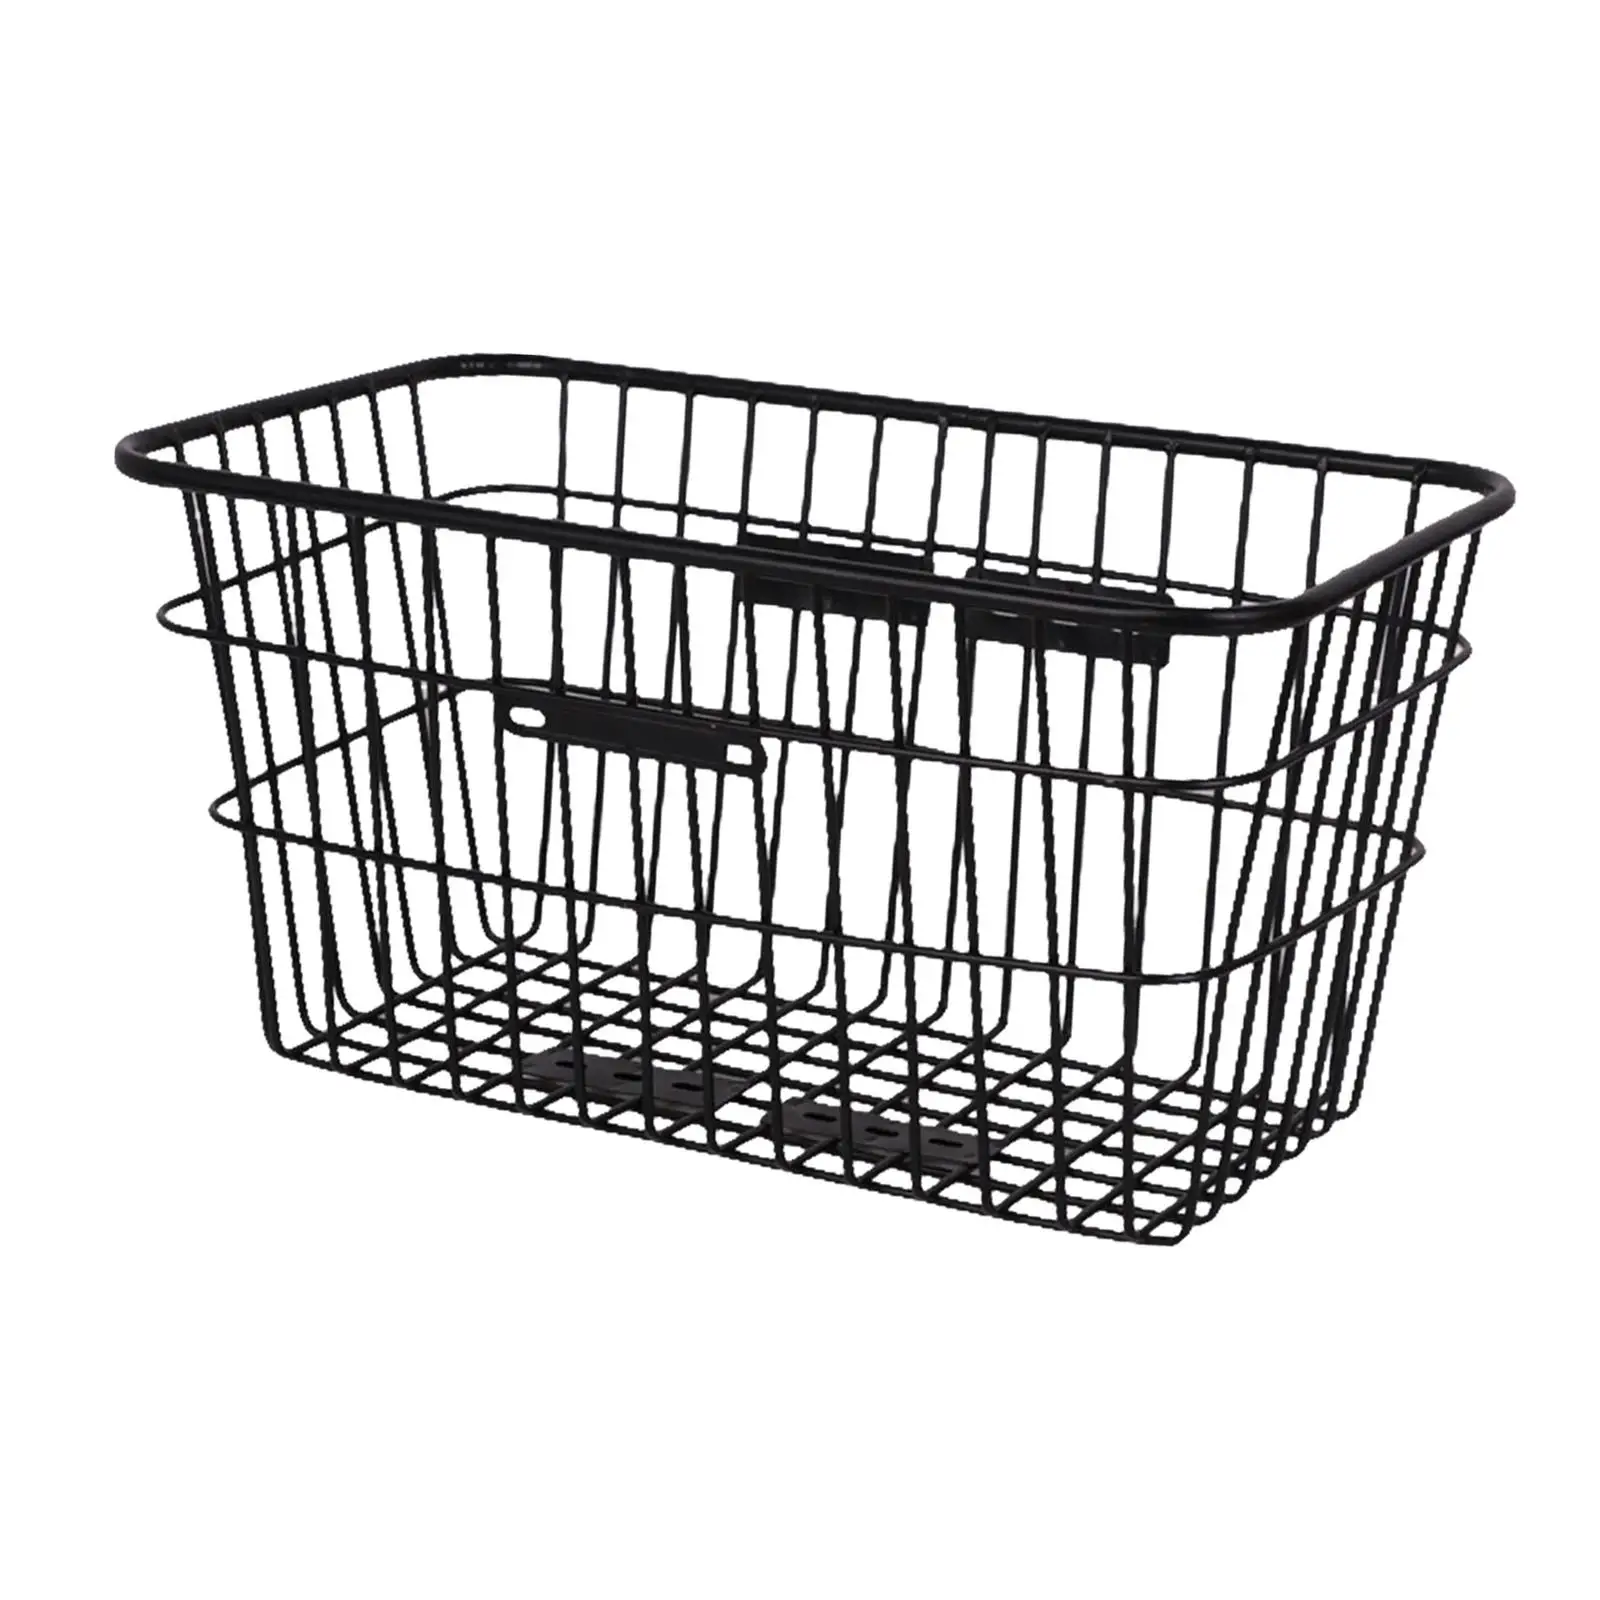 Bicycle Basket Large Space Front/Rear Metal Men Women Bicycle Frame Basket for Picnic Grocery Shopping Outdoor Bike Accessories